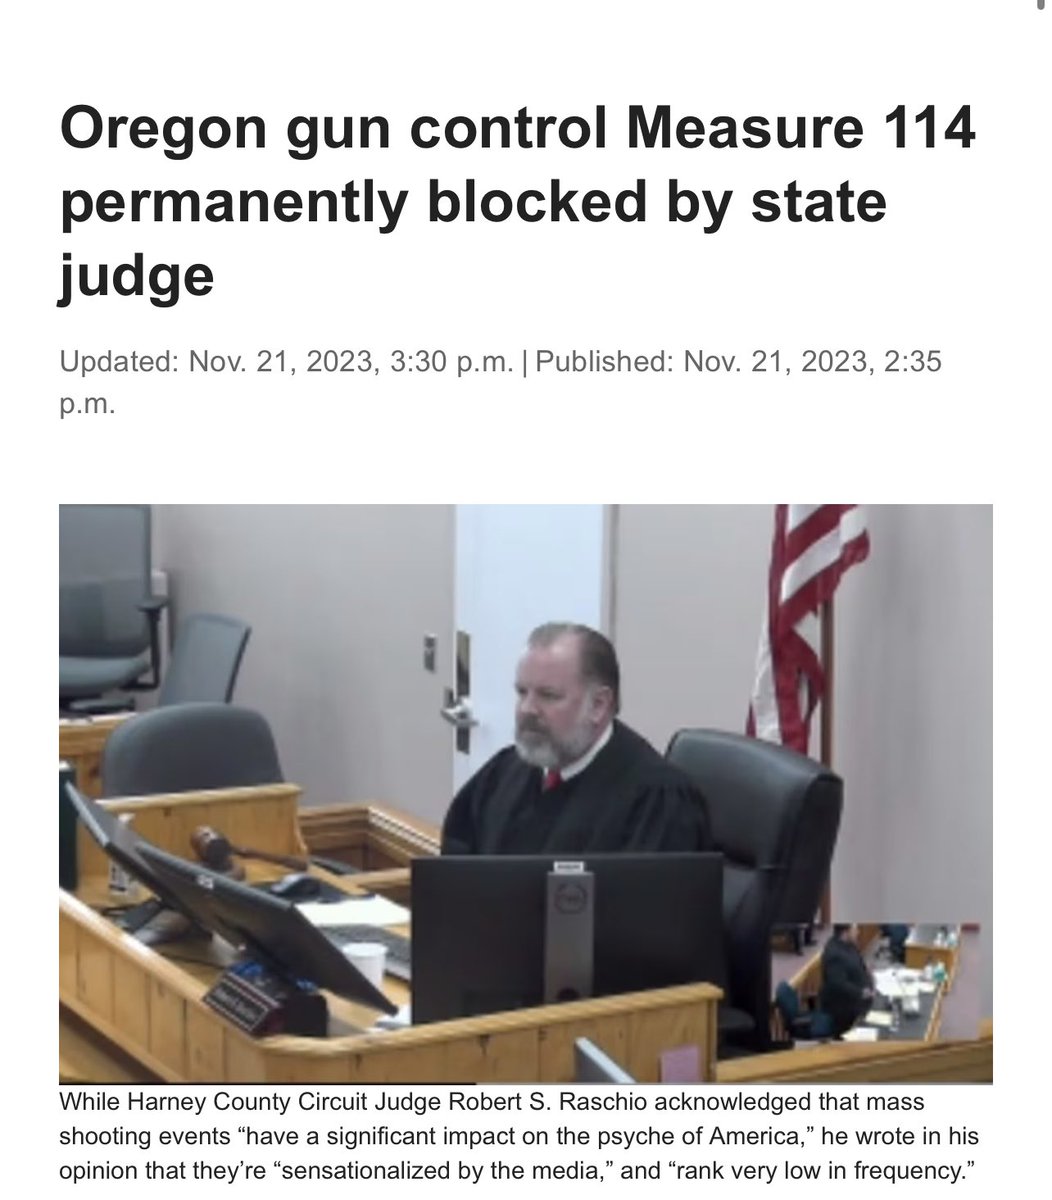 🚨 Oregon gun control Measure 114 permanently Blocked! 🚨 “the measure would have “negative public safety consequences on policing, increasing a safety risk to the public and the police’s own ability to protect themselves from emergent harm,” It’s a great day to protect the 2A